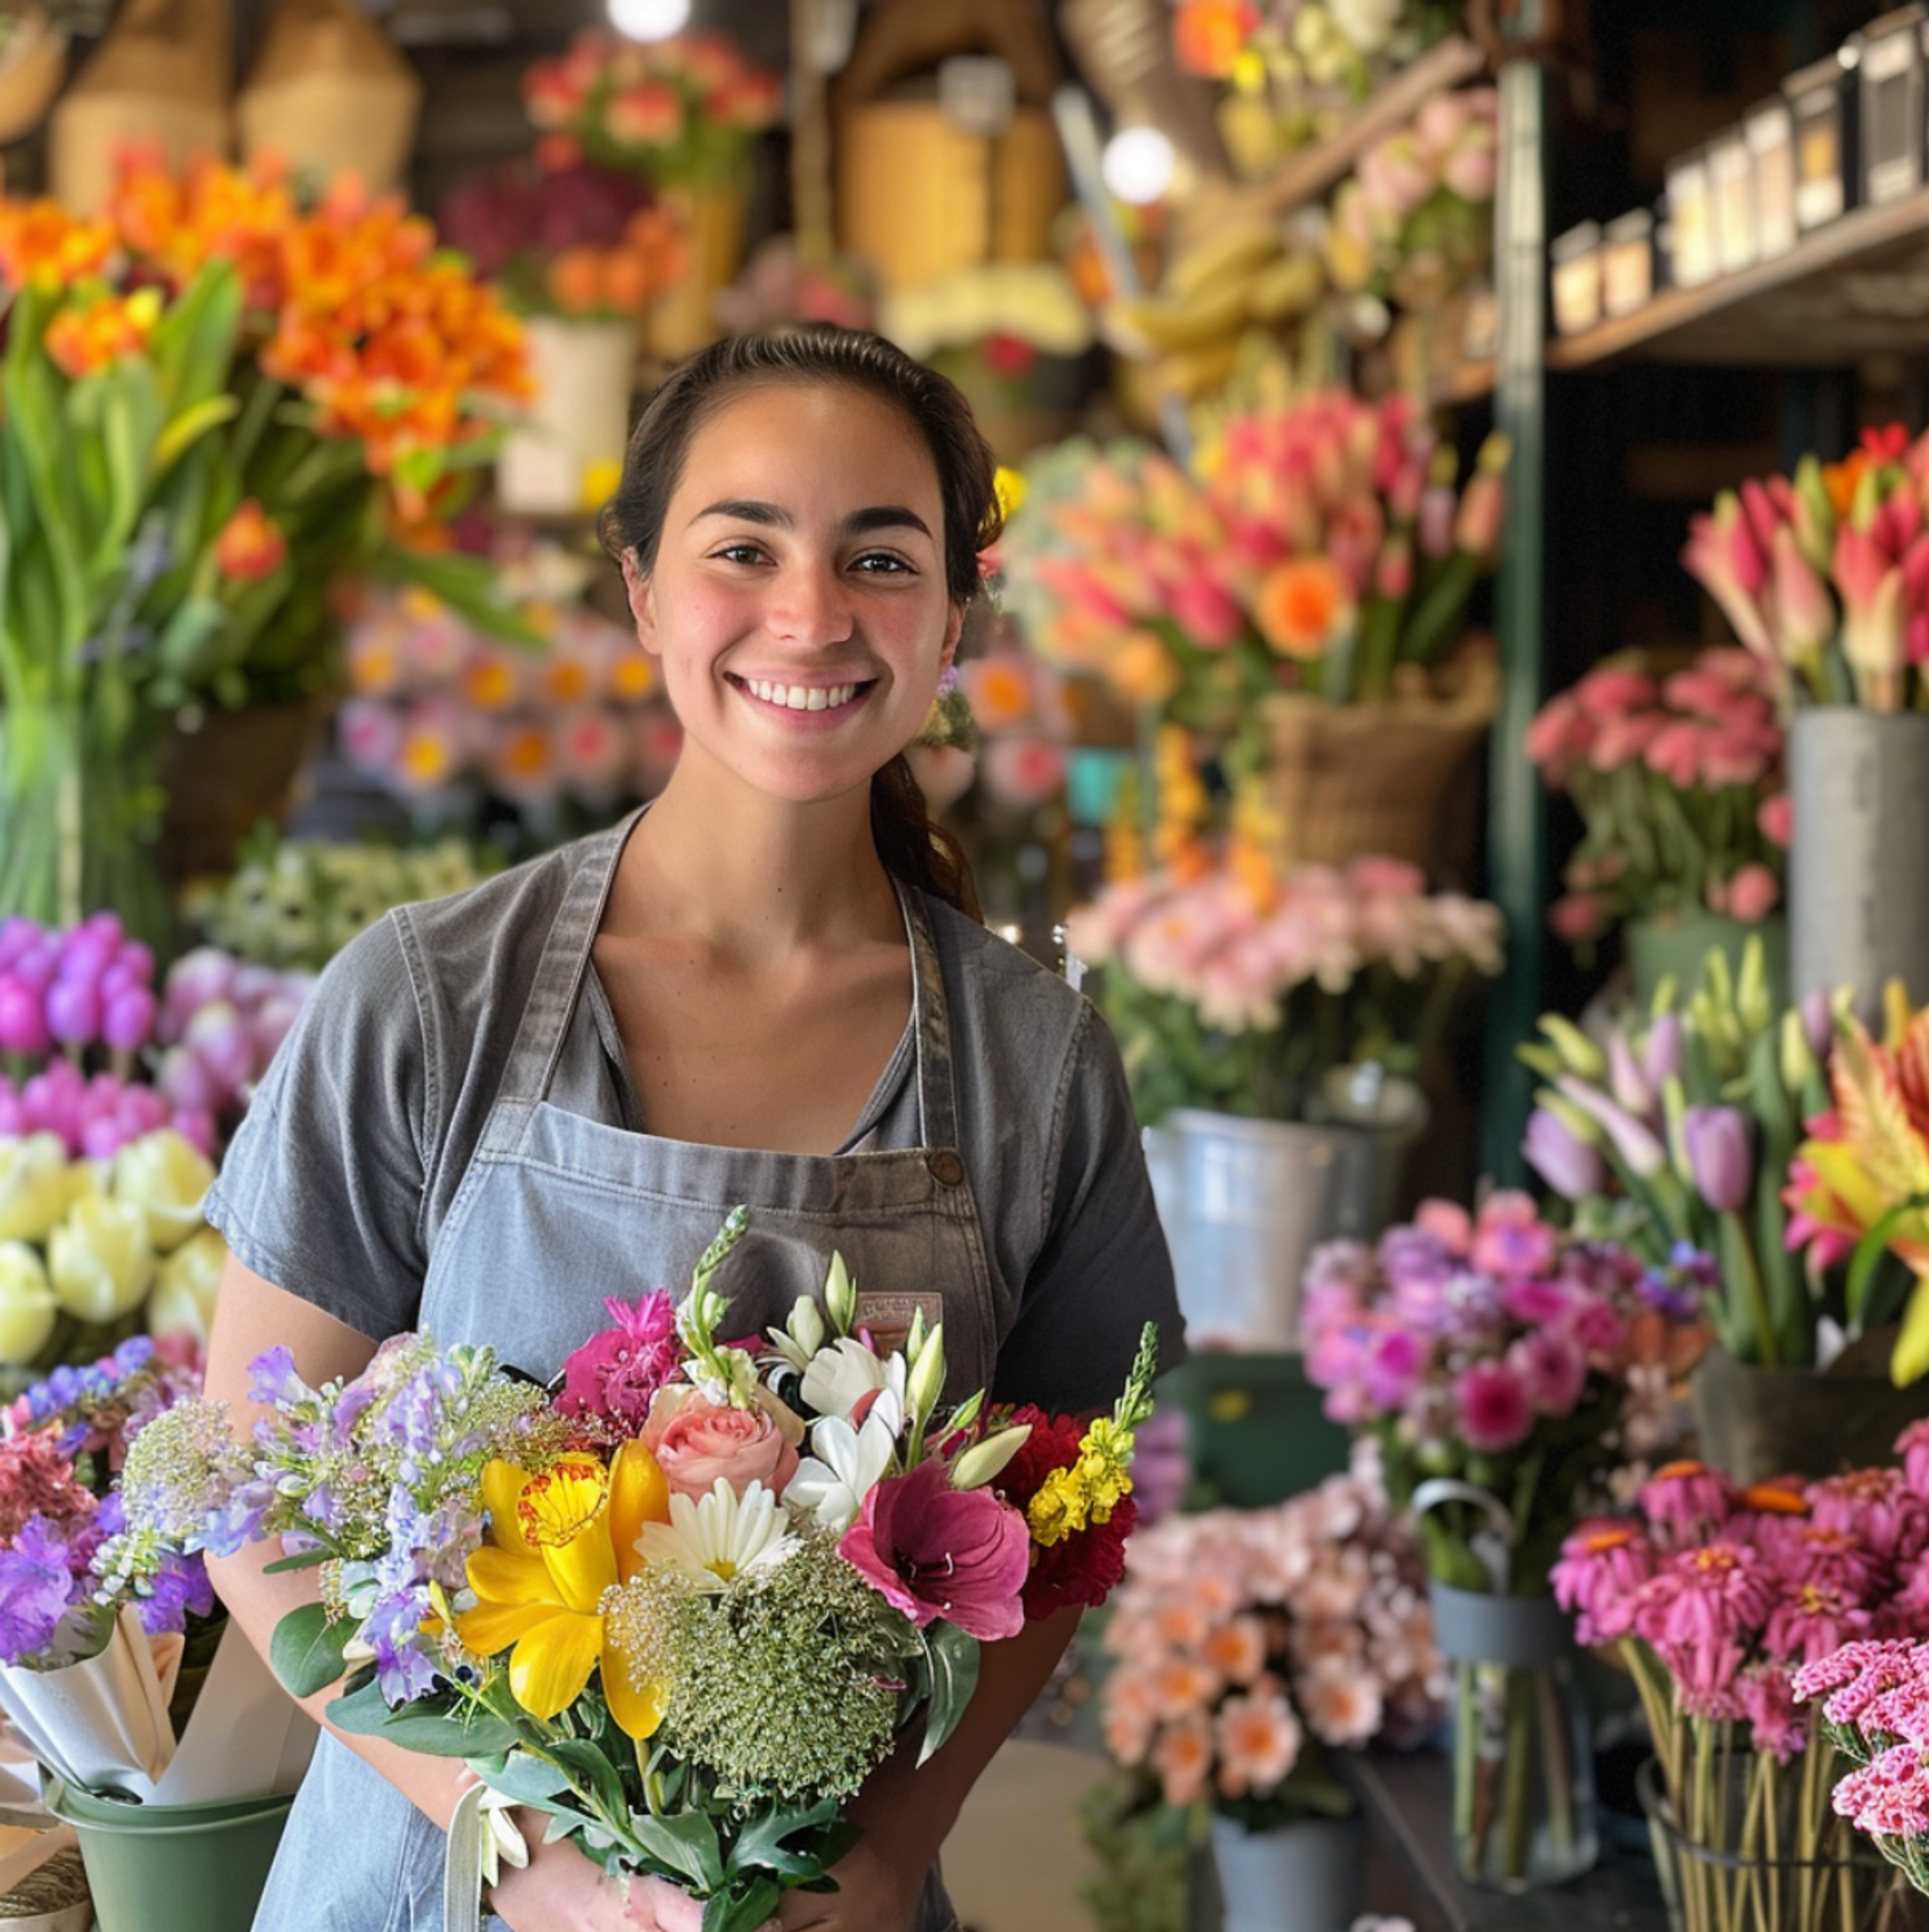 A cheerful florist in a gray apron stands in her vibrant flower shop, holding a lush bouquet with a variety of flowers including bright yellow lilies, deep pink roses, and delicate white daisies. The background is a colorful array of fresh floral arrangements and buckets filled with tulips and other blooms, conveying a busy and abundant flower shop that offers same-day delivery.